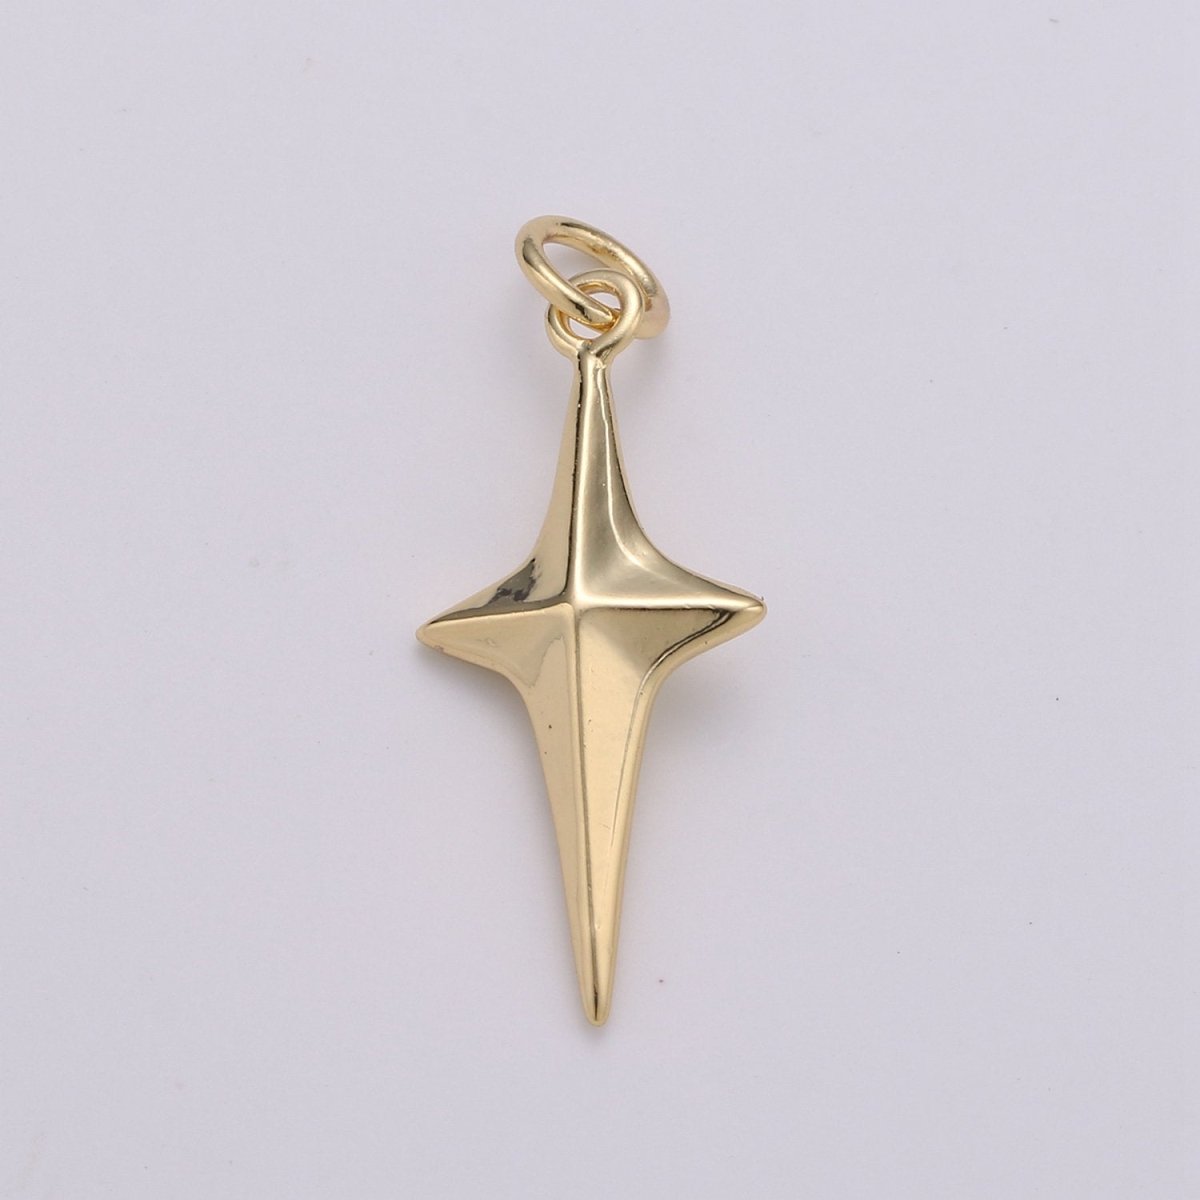 25x10mm 24k Gold Filled North Star Charms, Gold Star Pendant, Celestial Jewelry Minimalist Jewelry Making supply D-354 - DLUXCA